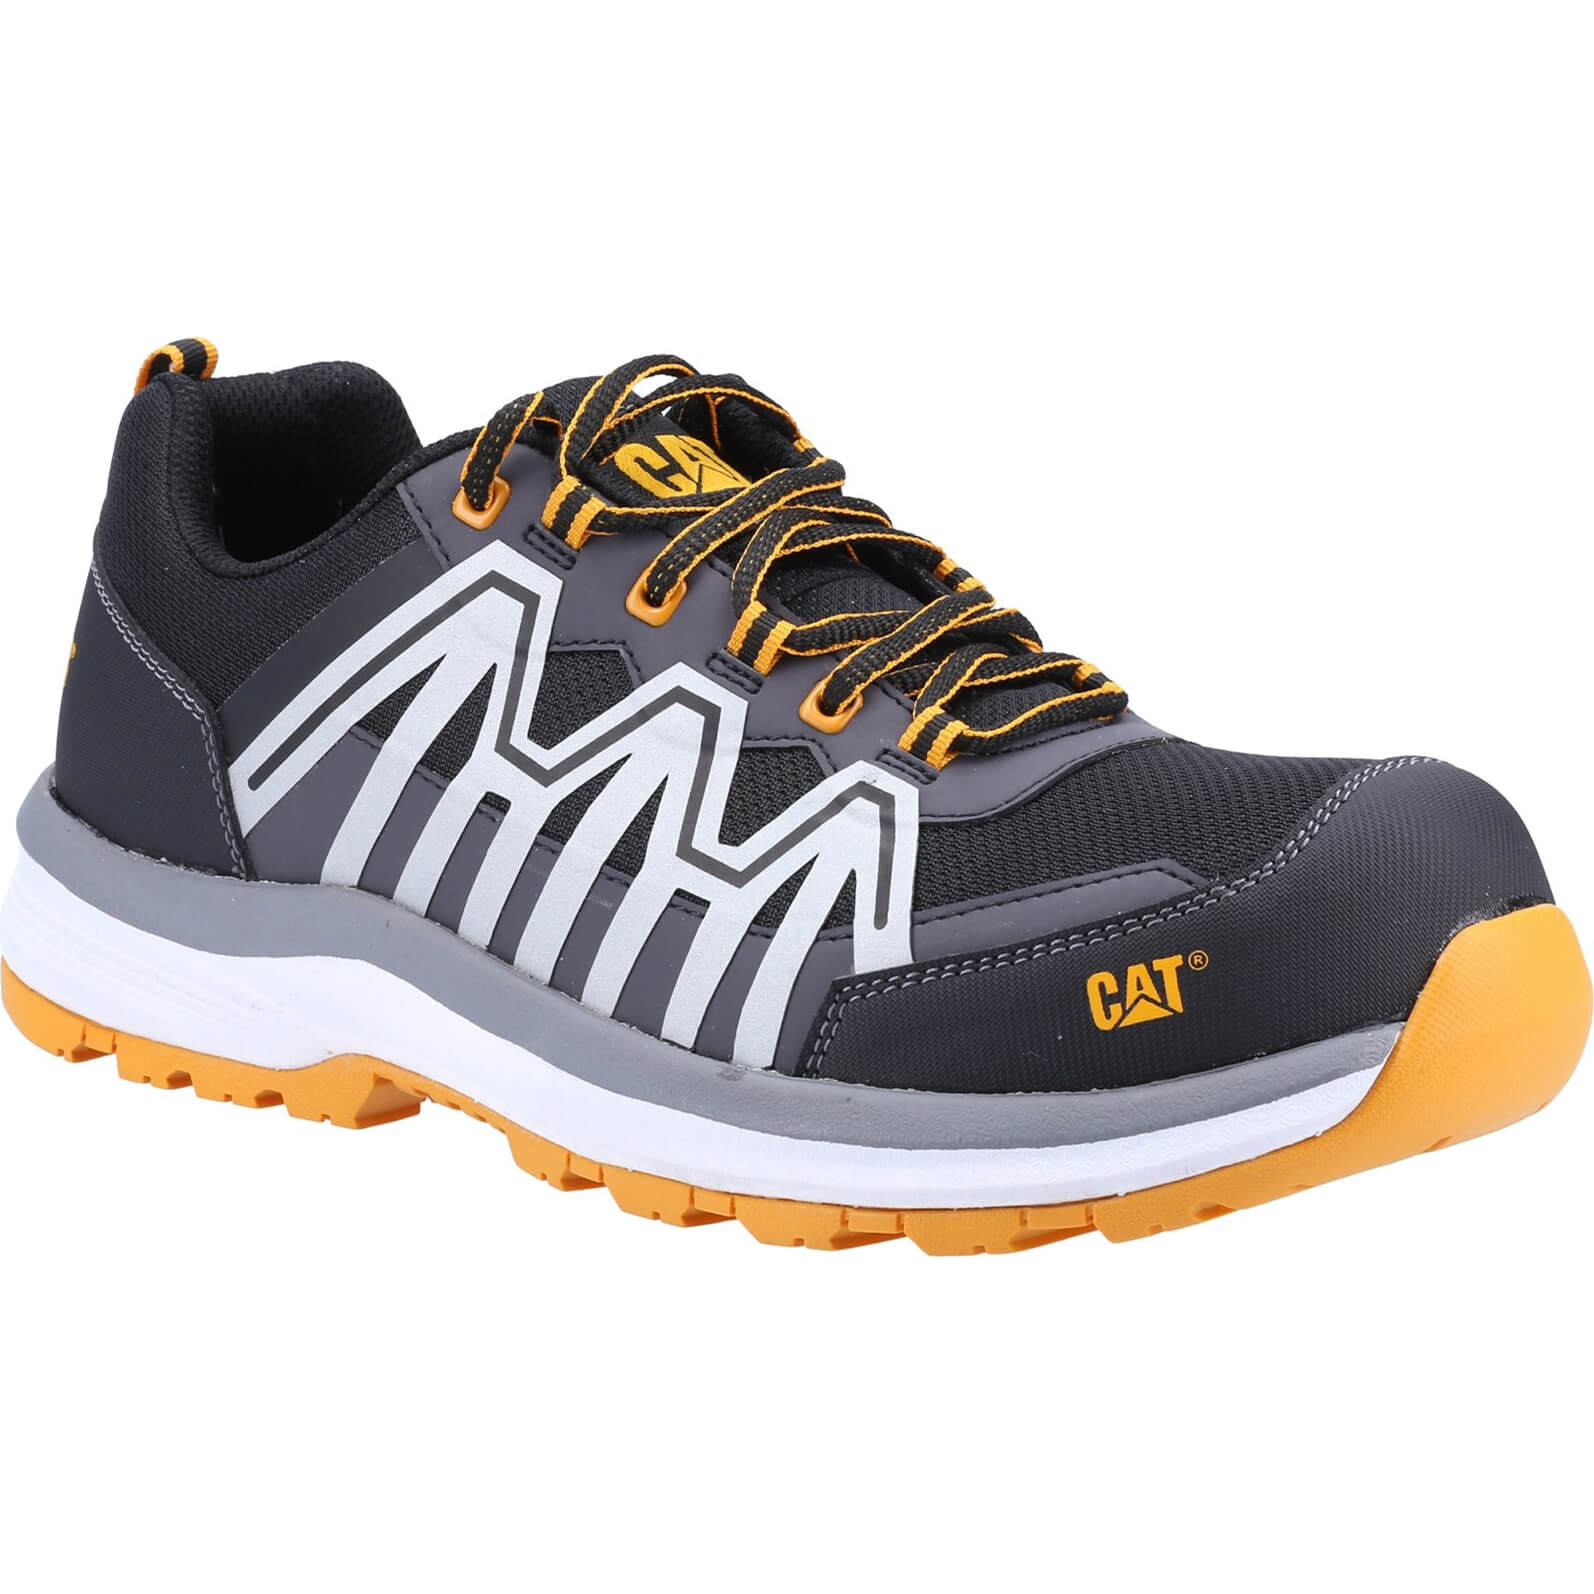 Image of Caterpillar Mens Charge S3 Safety Trainer Orange Size 8